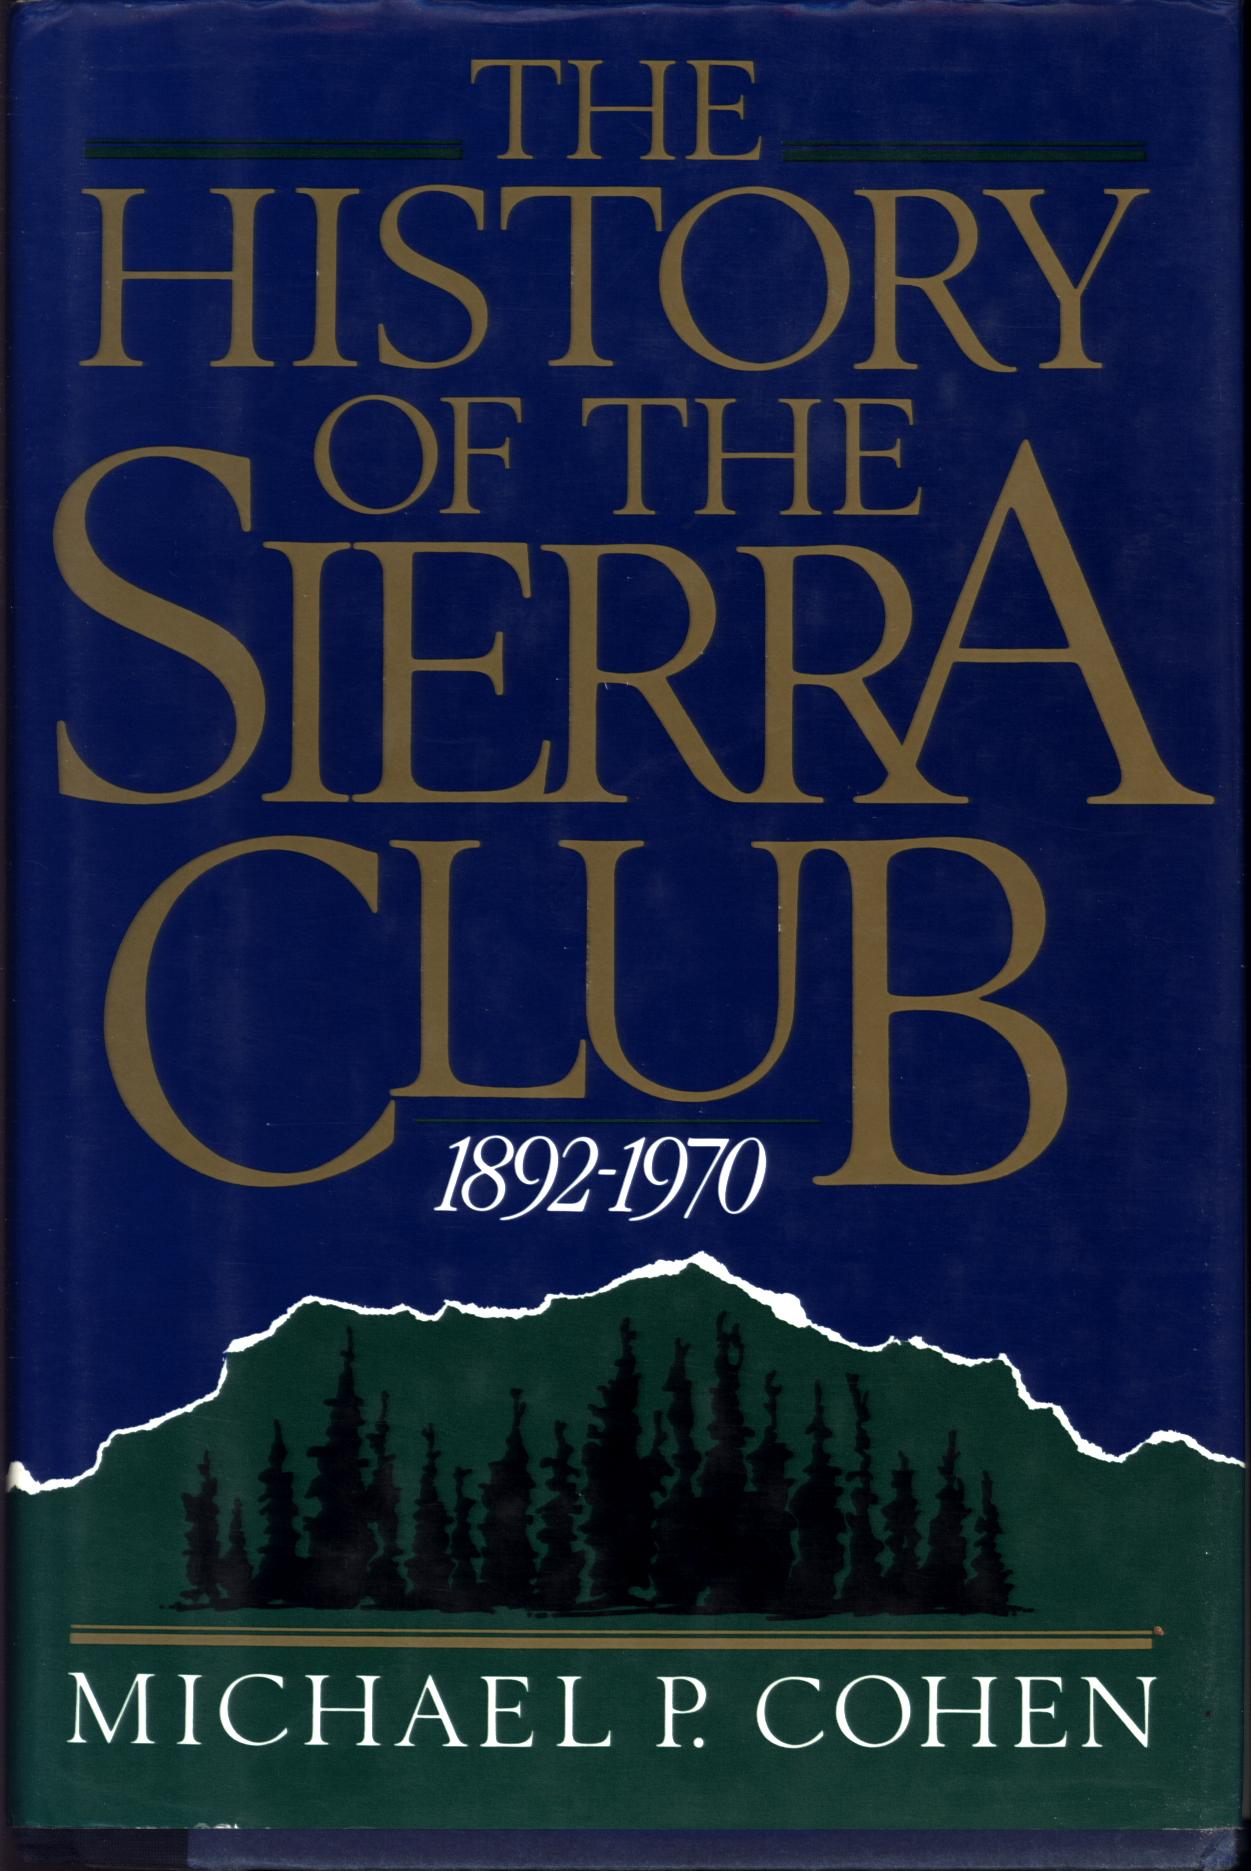 THE HISTORY OF THE SIERRA CLUB 1892-970. 